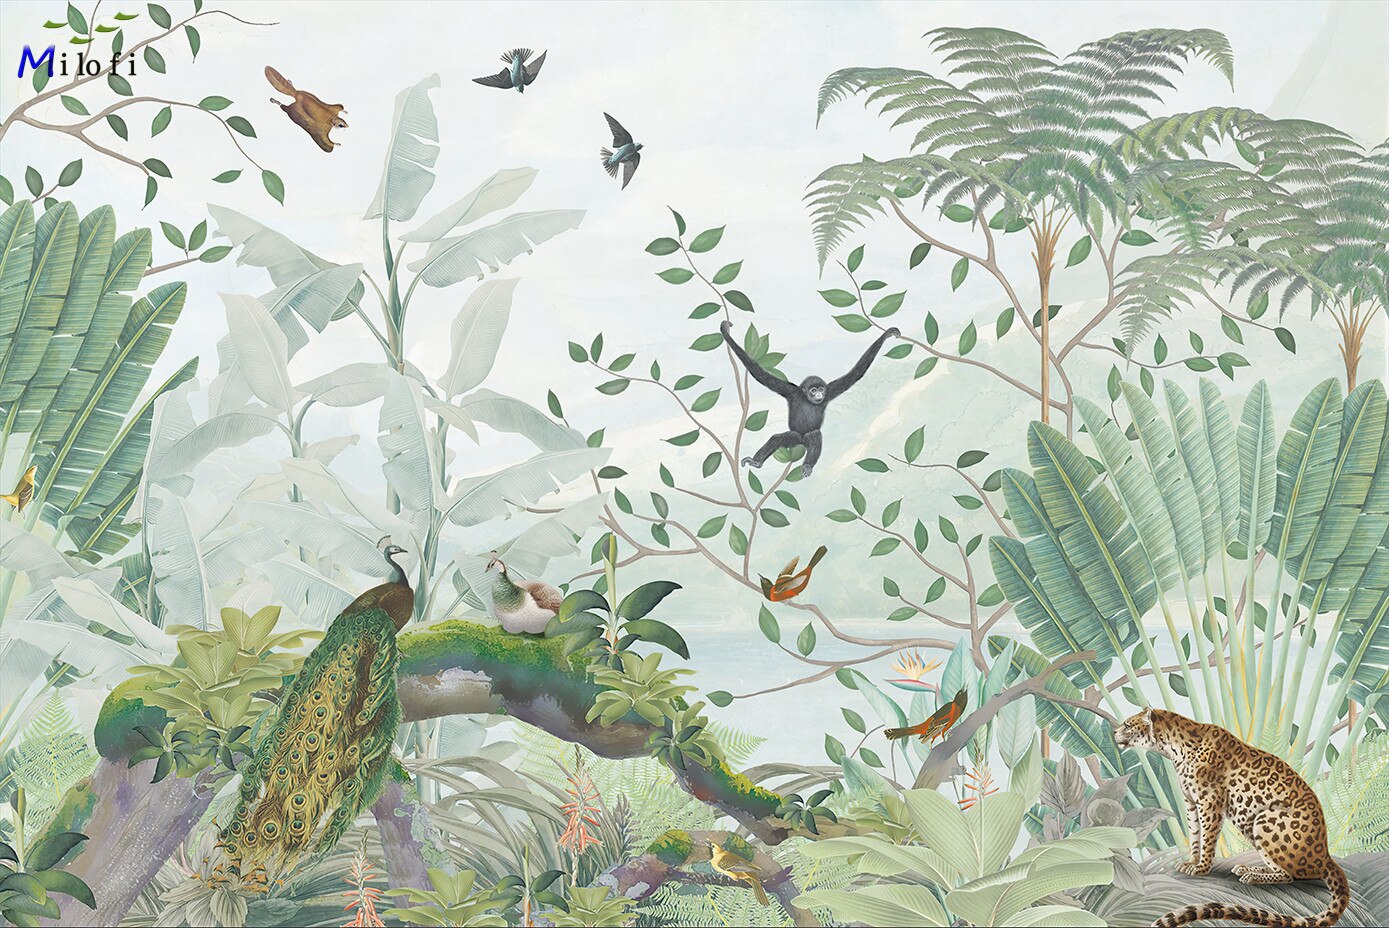 Jungle Animals and Peacock Viewpoint Wallpaper Mural